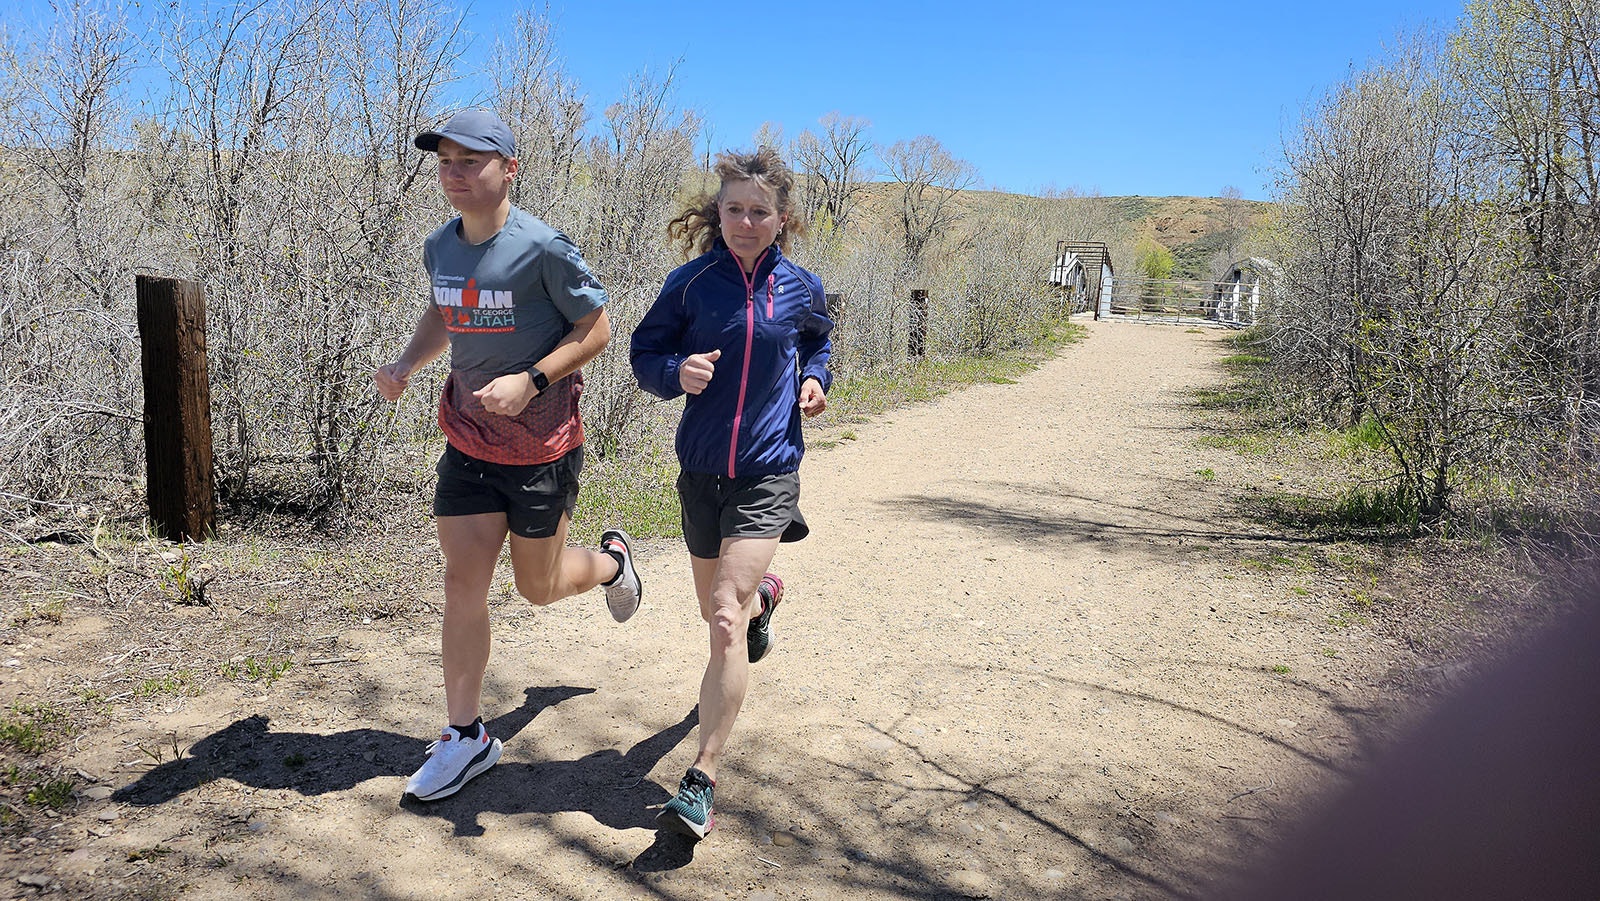 April Lange, here on a trail run with son Isaiah near the home in Evanston, Wyoming, last week.